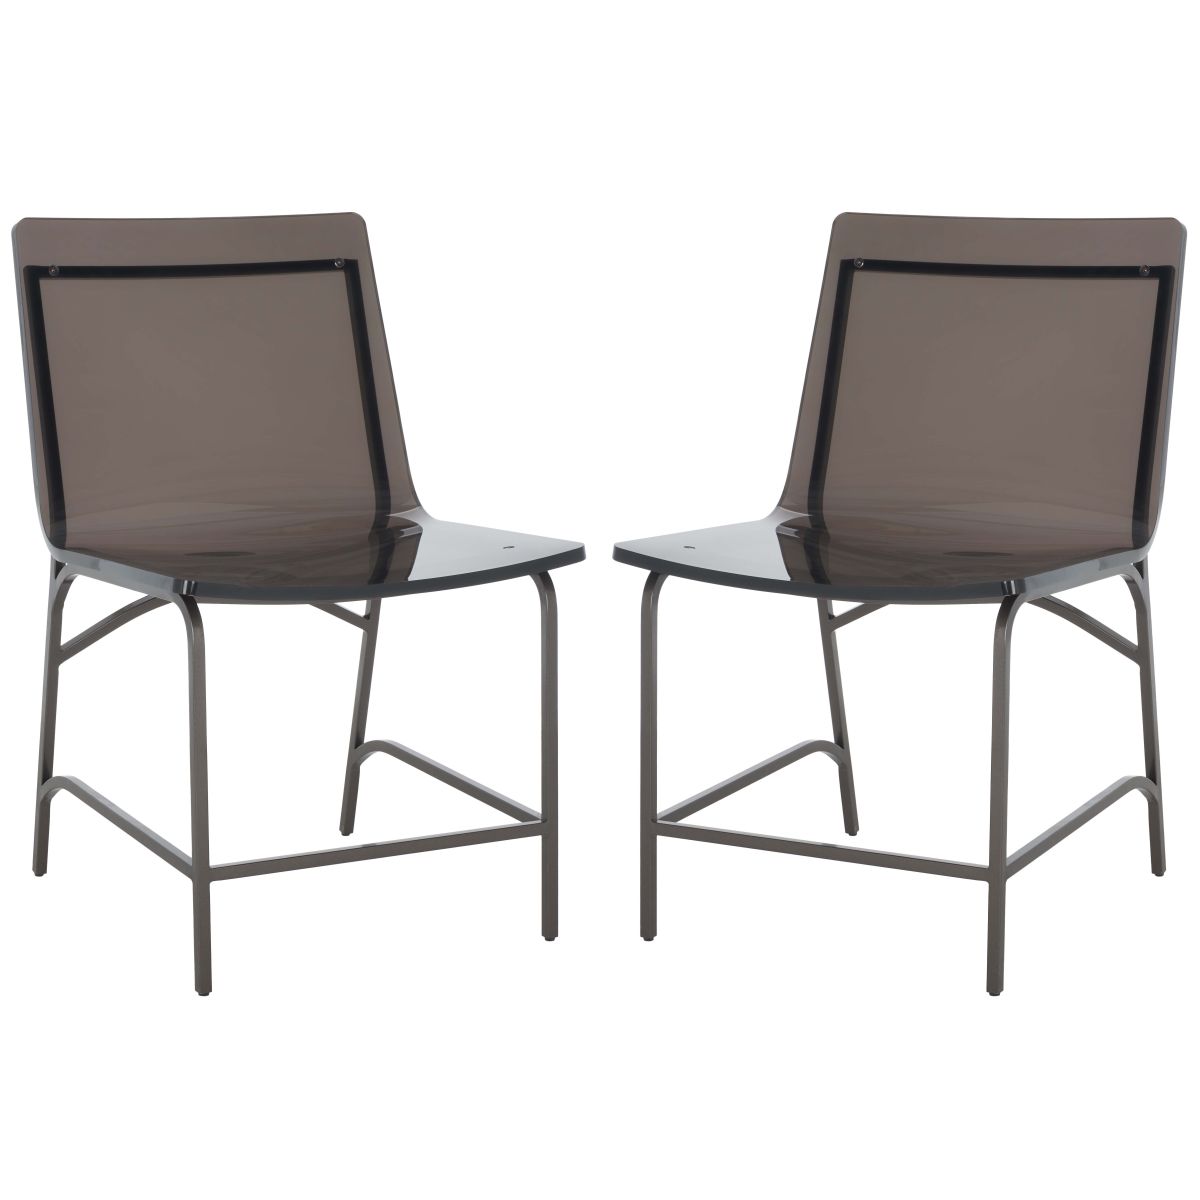 Safavieh Couture Bryant Acrylic Dining Chair